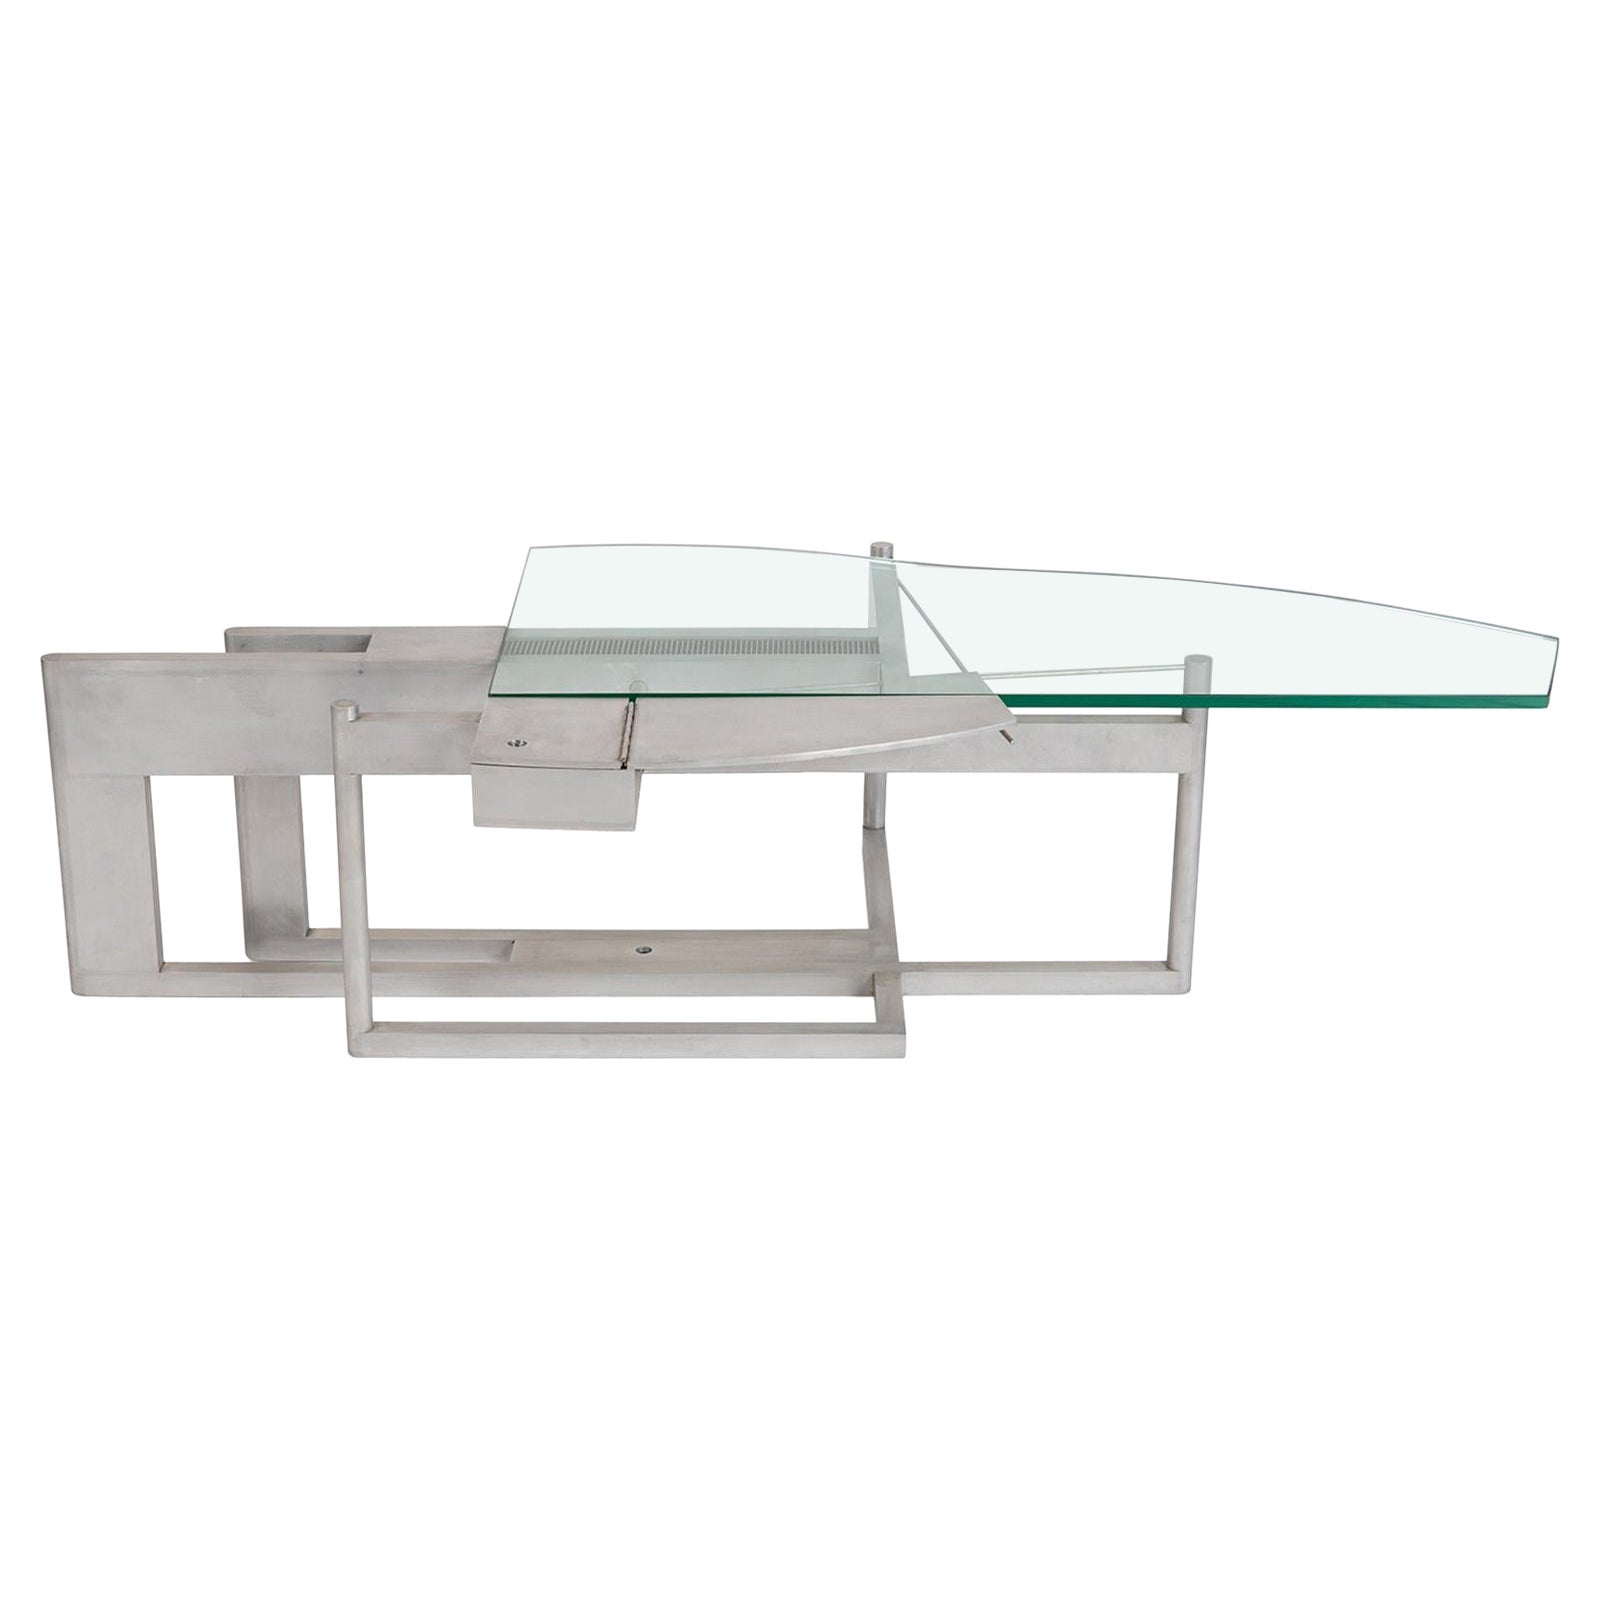 Architectural 1980's Prototype Coffee Table by Robert Whitton